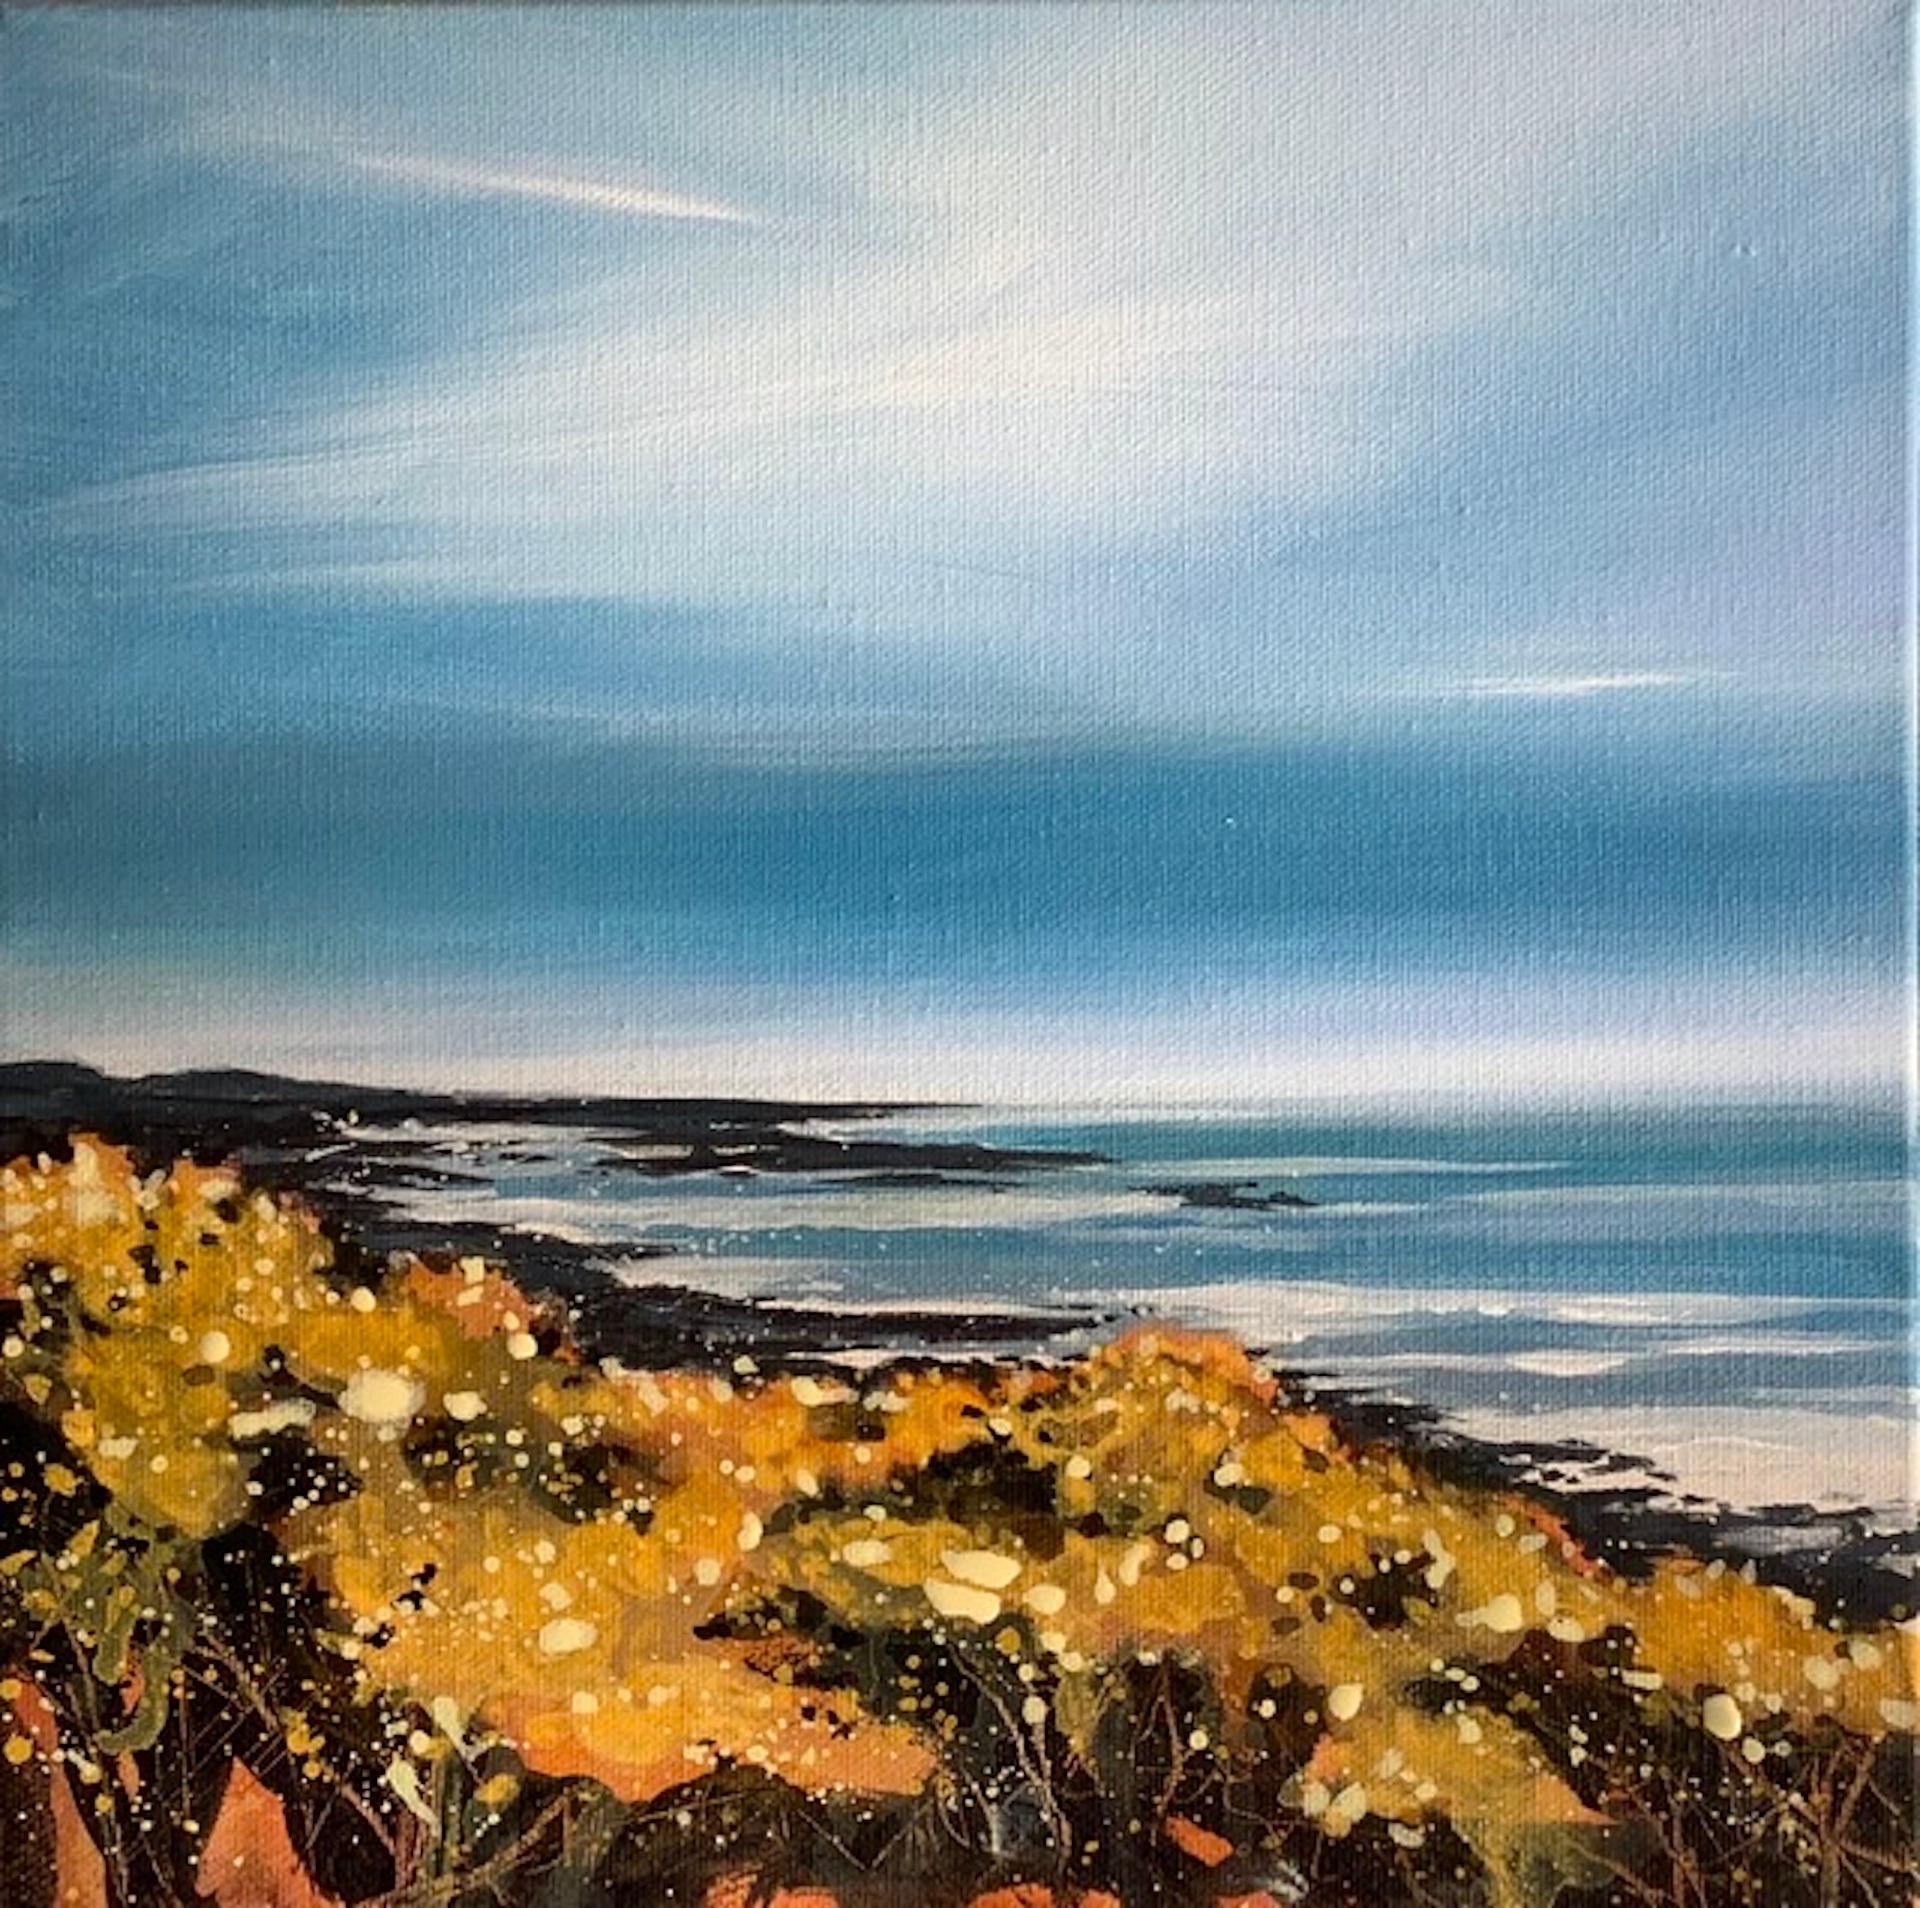 Adele Riley
Cornish Gorse Headland
Original Seascape Diptych Painting
Acrylic Paint and Acrylic Ink on framed boxed canvas
Size Unframed: H 30Cm x W 30cm x D 3cm
Size Framed: H 35cm x W 35cm x D 5cm
Please note that insitu images are purely an